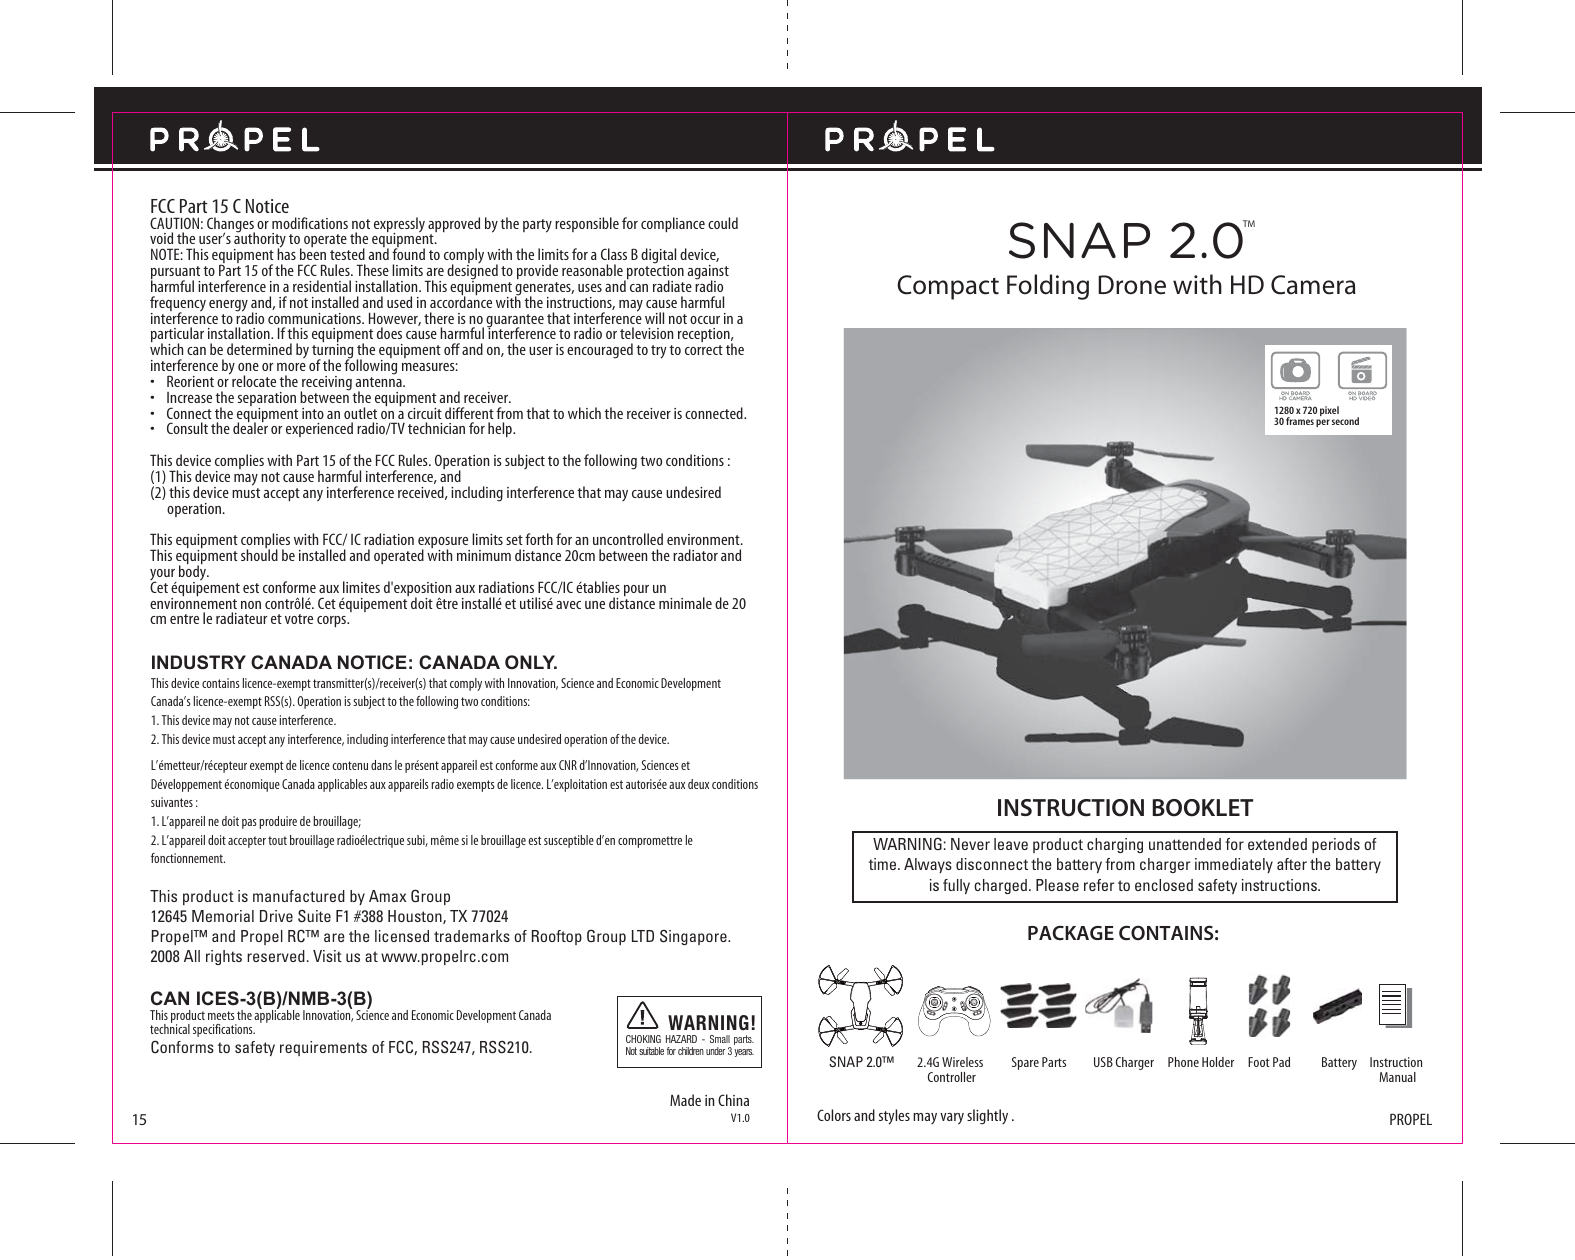 How To Calibrate Propel Snap 2 0 Drone - Picture Of Drone